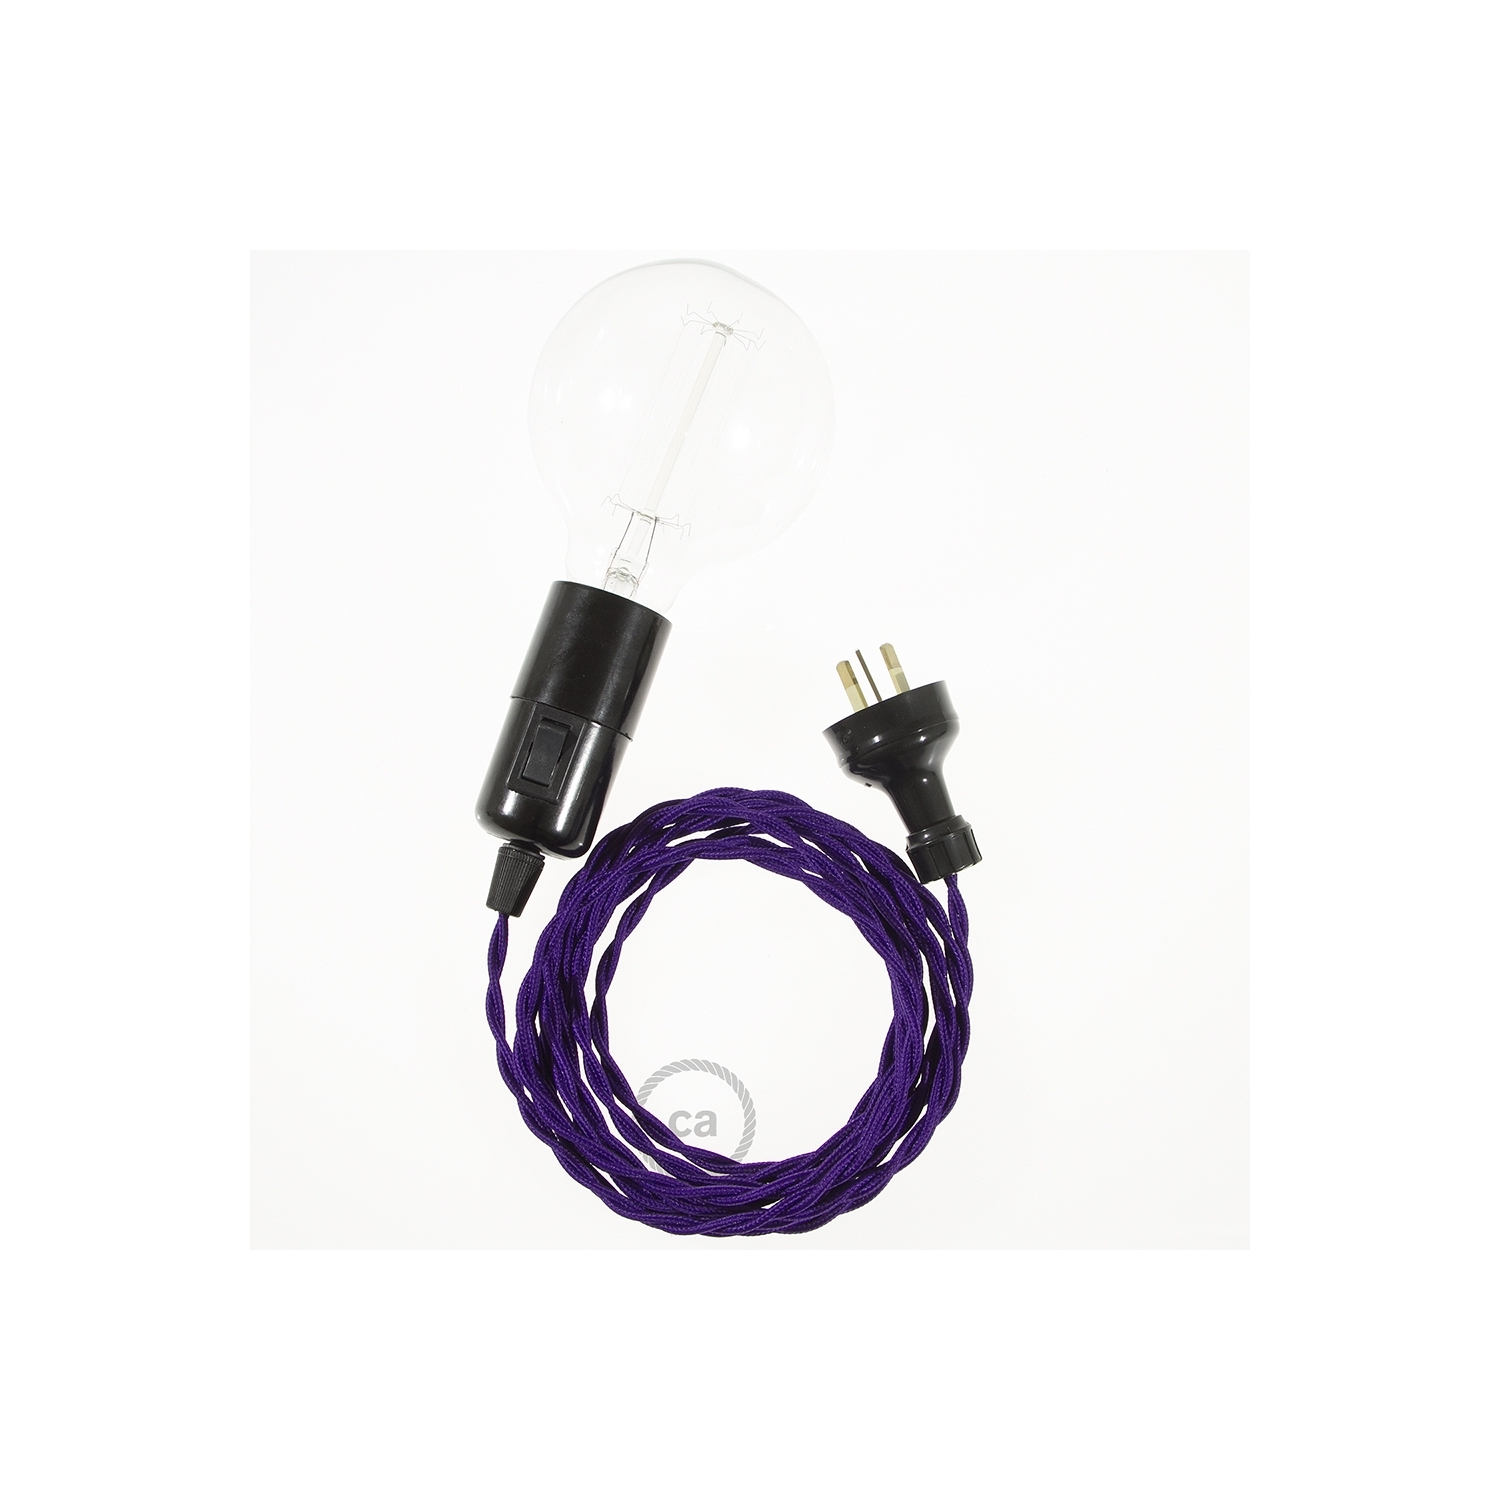 Create your TM14 Violet Rayon Snake and bring the light wherever you want.